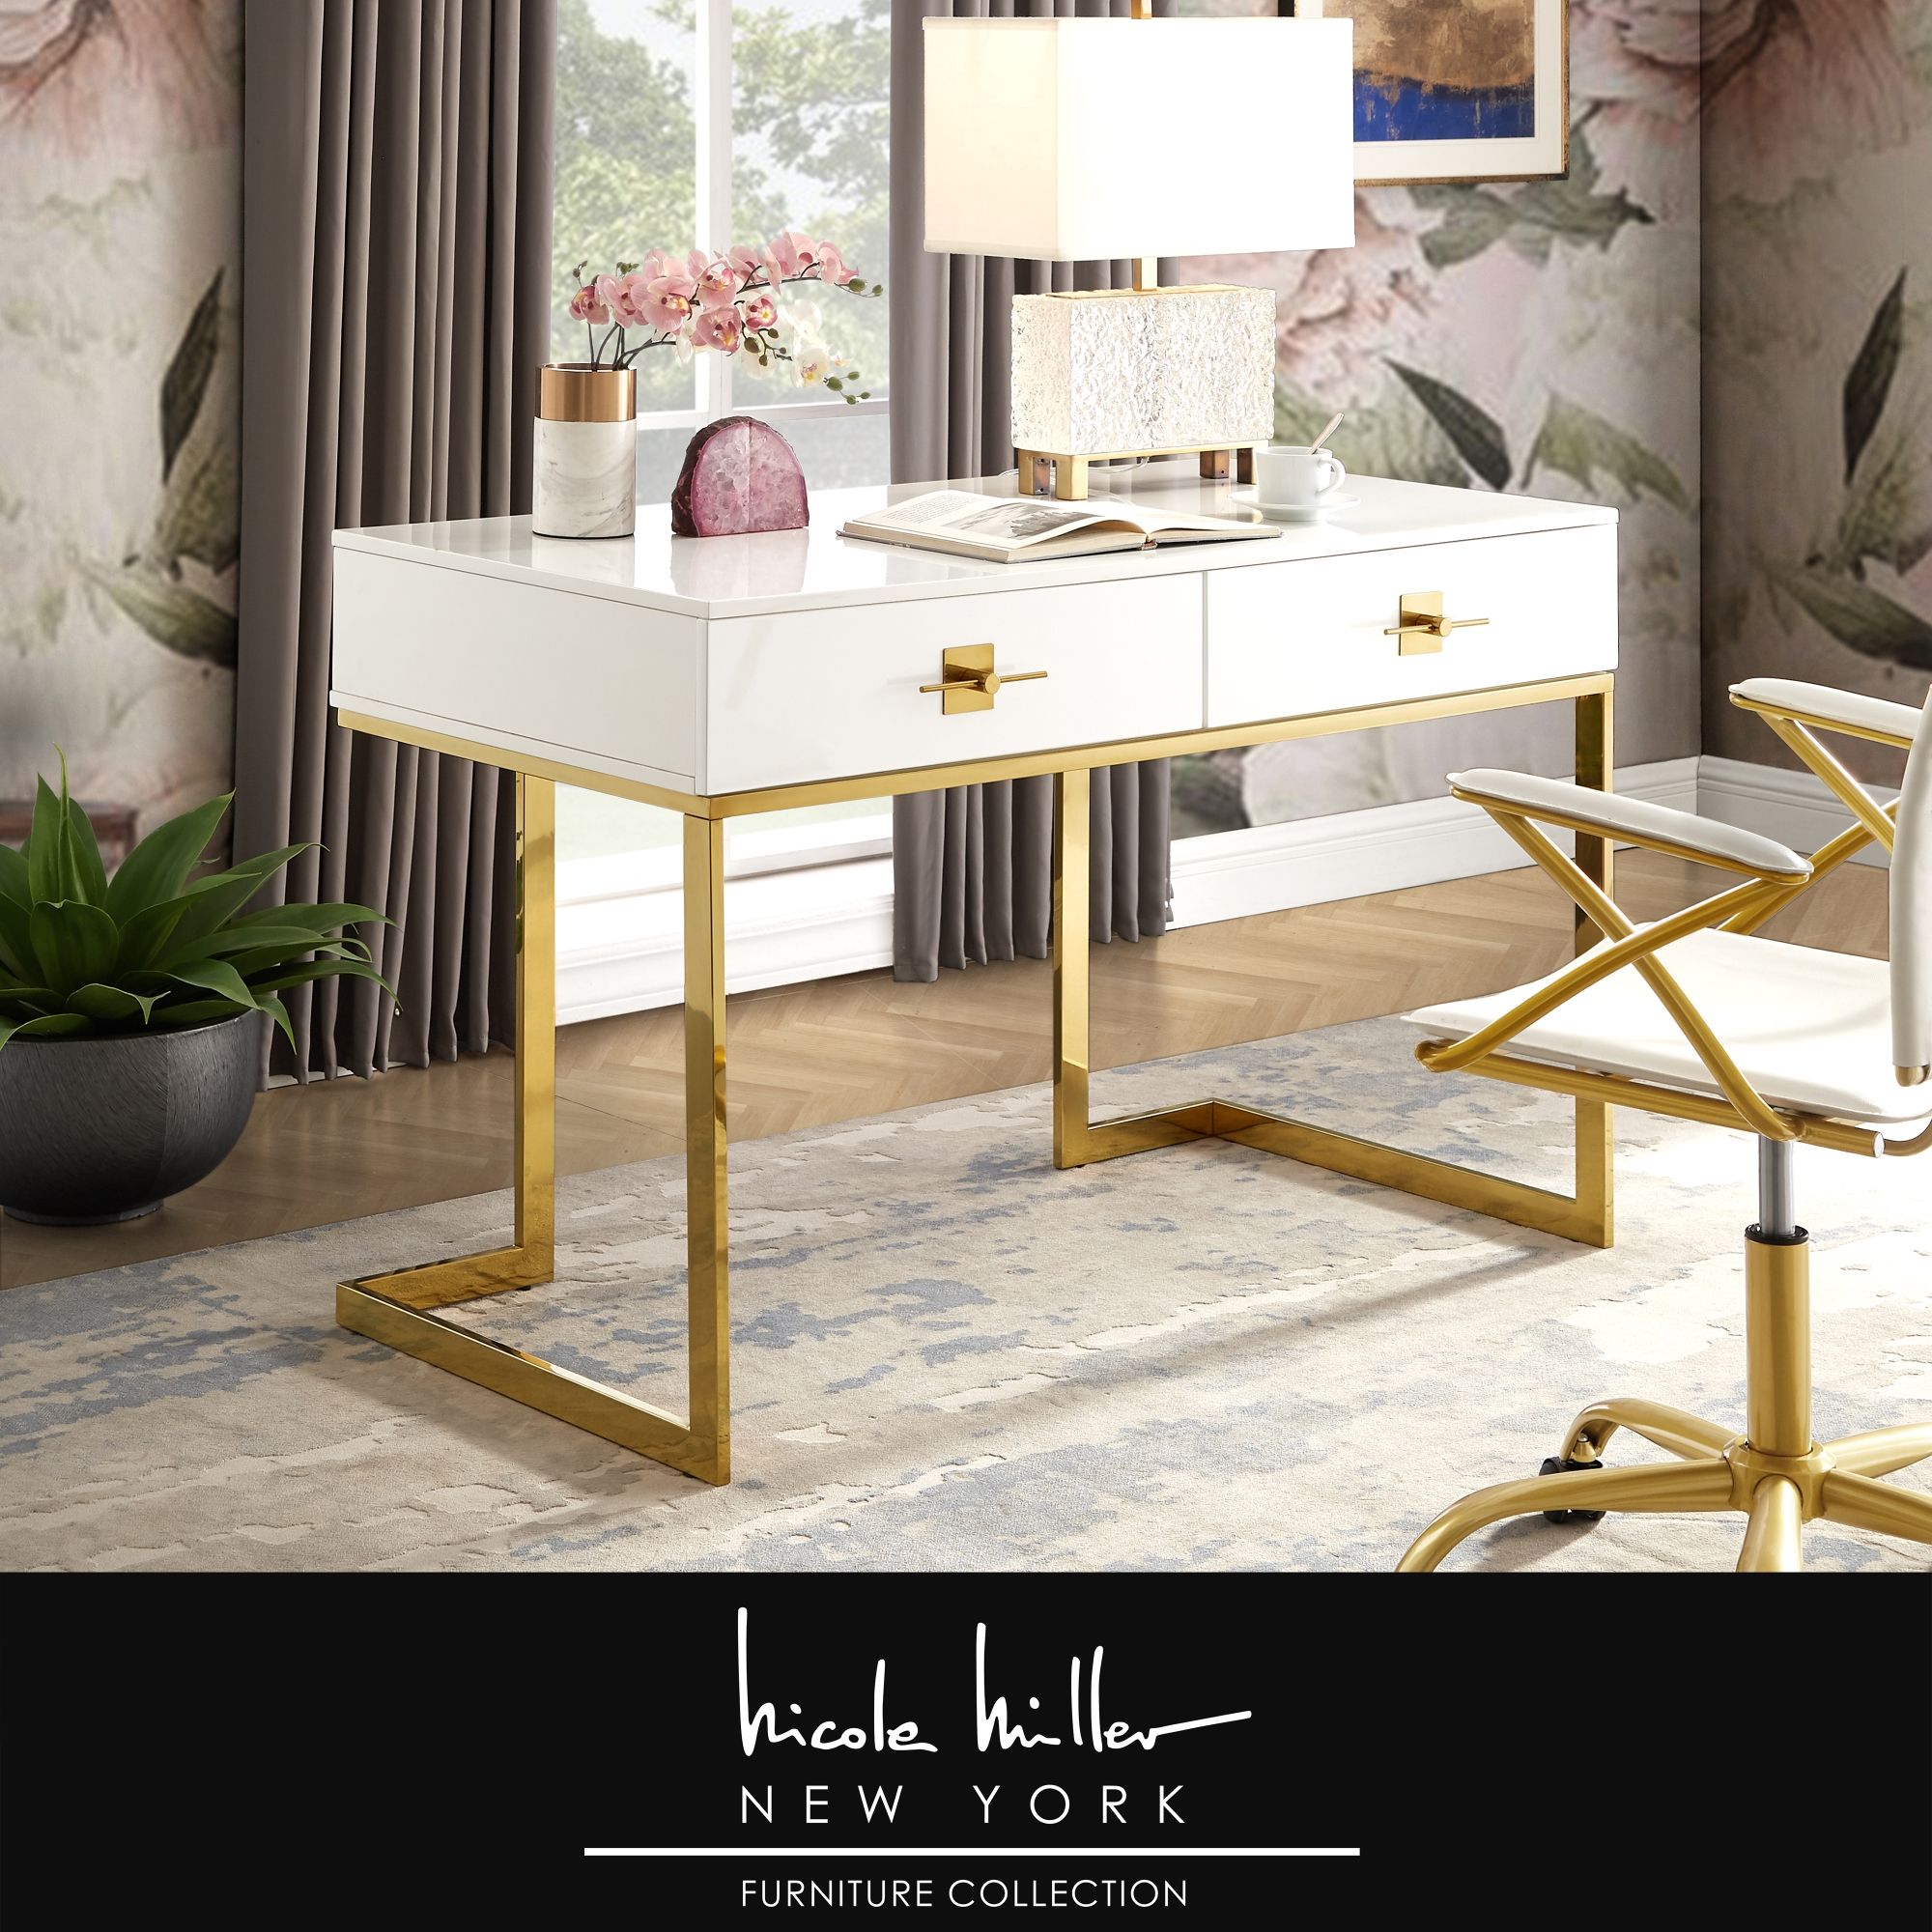 Nicole Miller Meli Writing Desk 2 Drawers Hight Gloss Lacquer Finish With Gold And Pink Writing Desks (View 3 of 15)